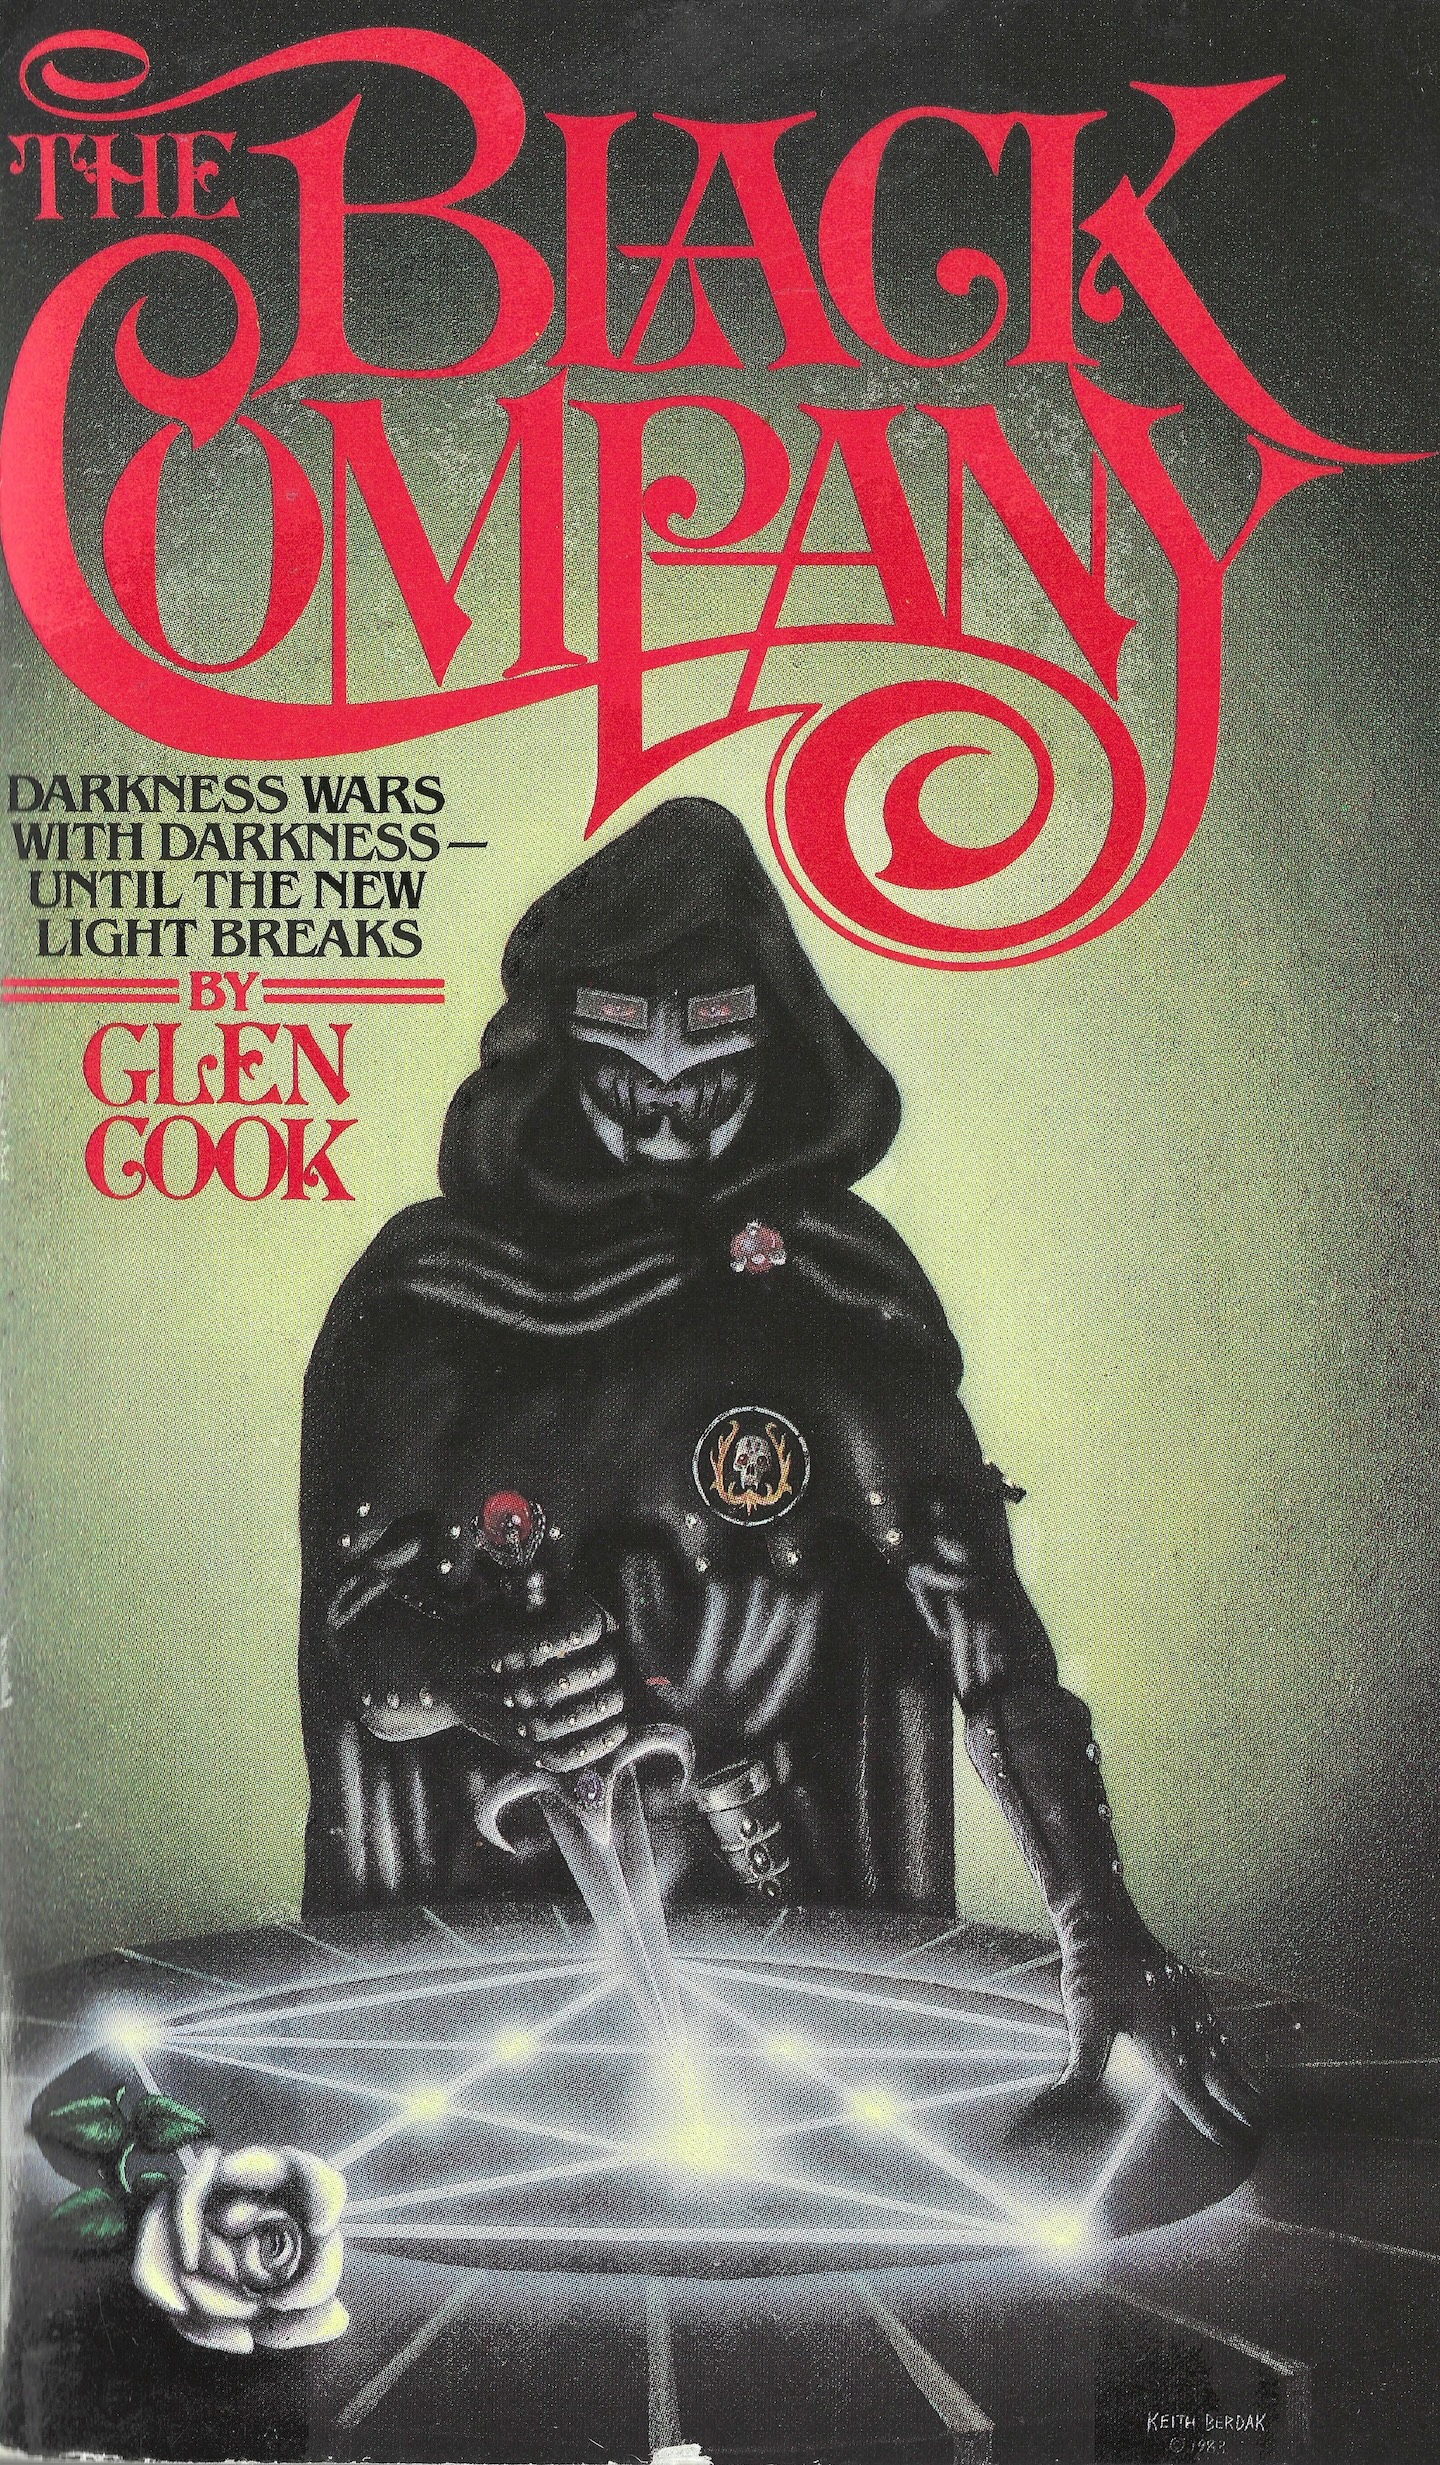 The cover of "The Black Company" by Glen Cook, a paperback from 1984